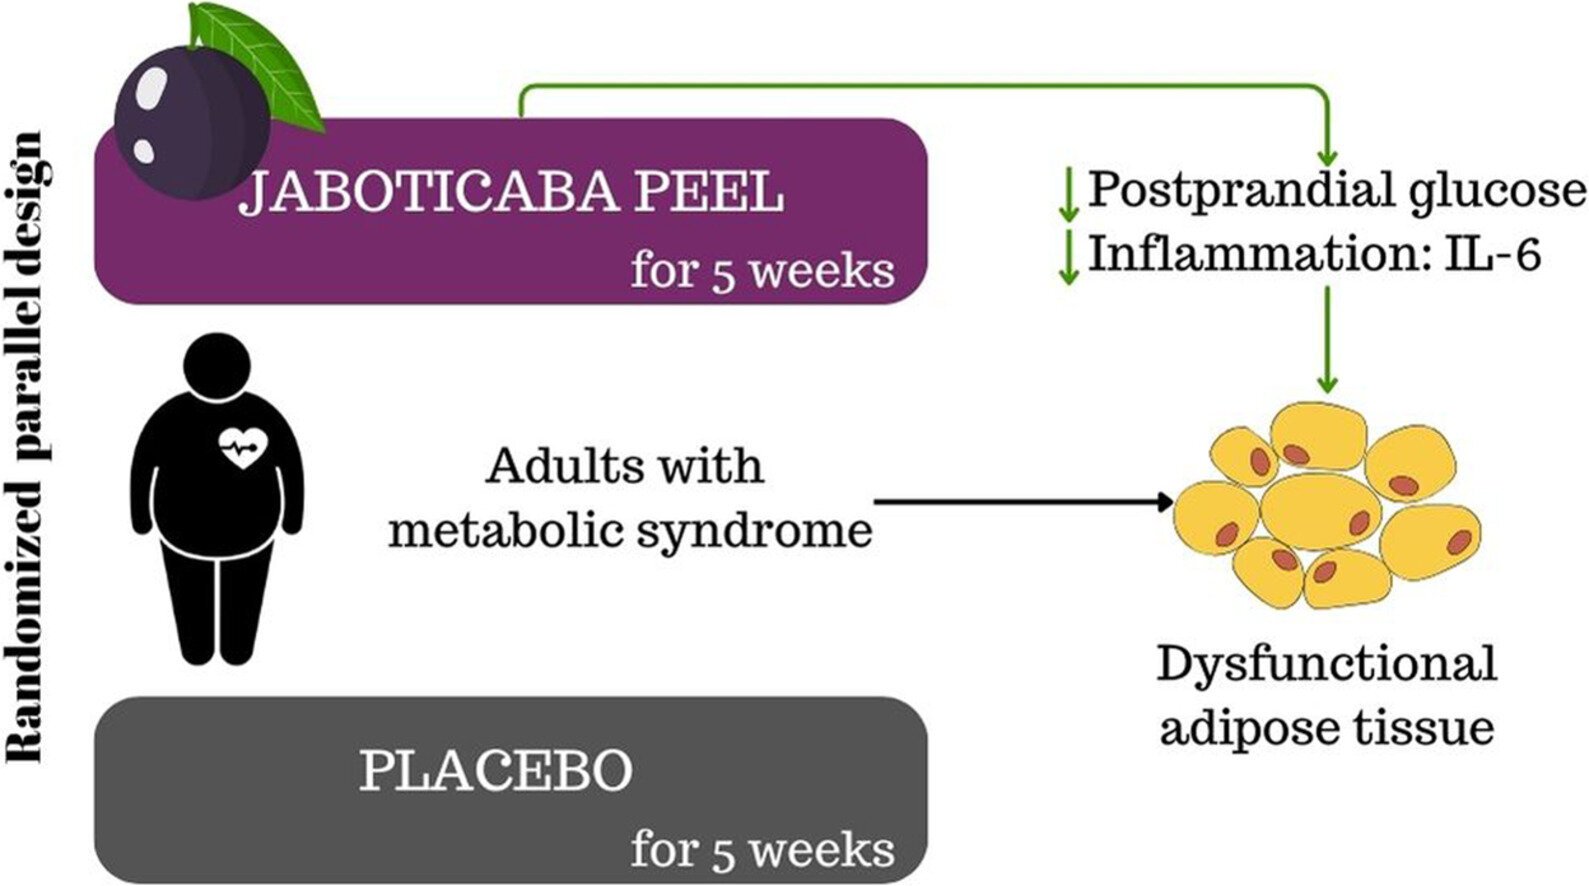 Study finds jaboticaba peel reduces inflammation and controls blood sugar in people with metabolic syndrome